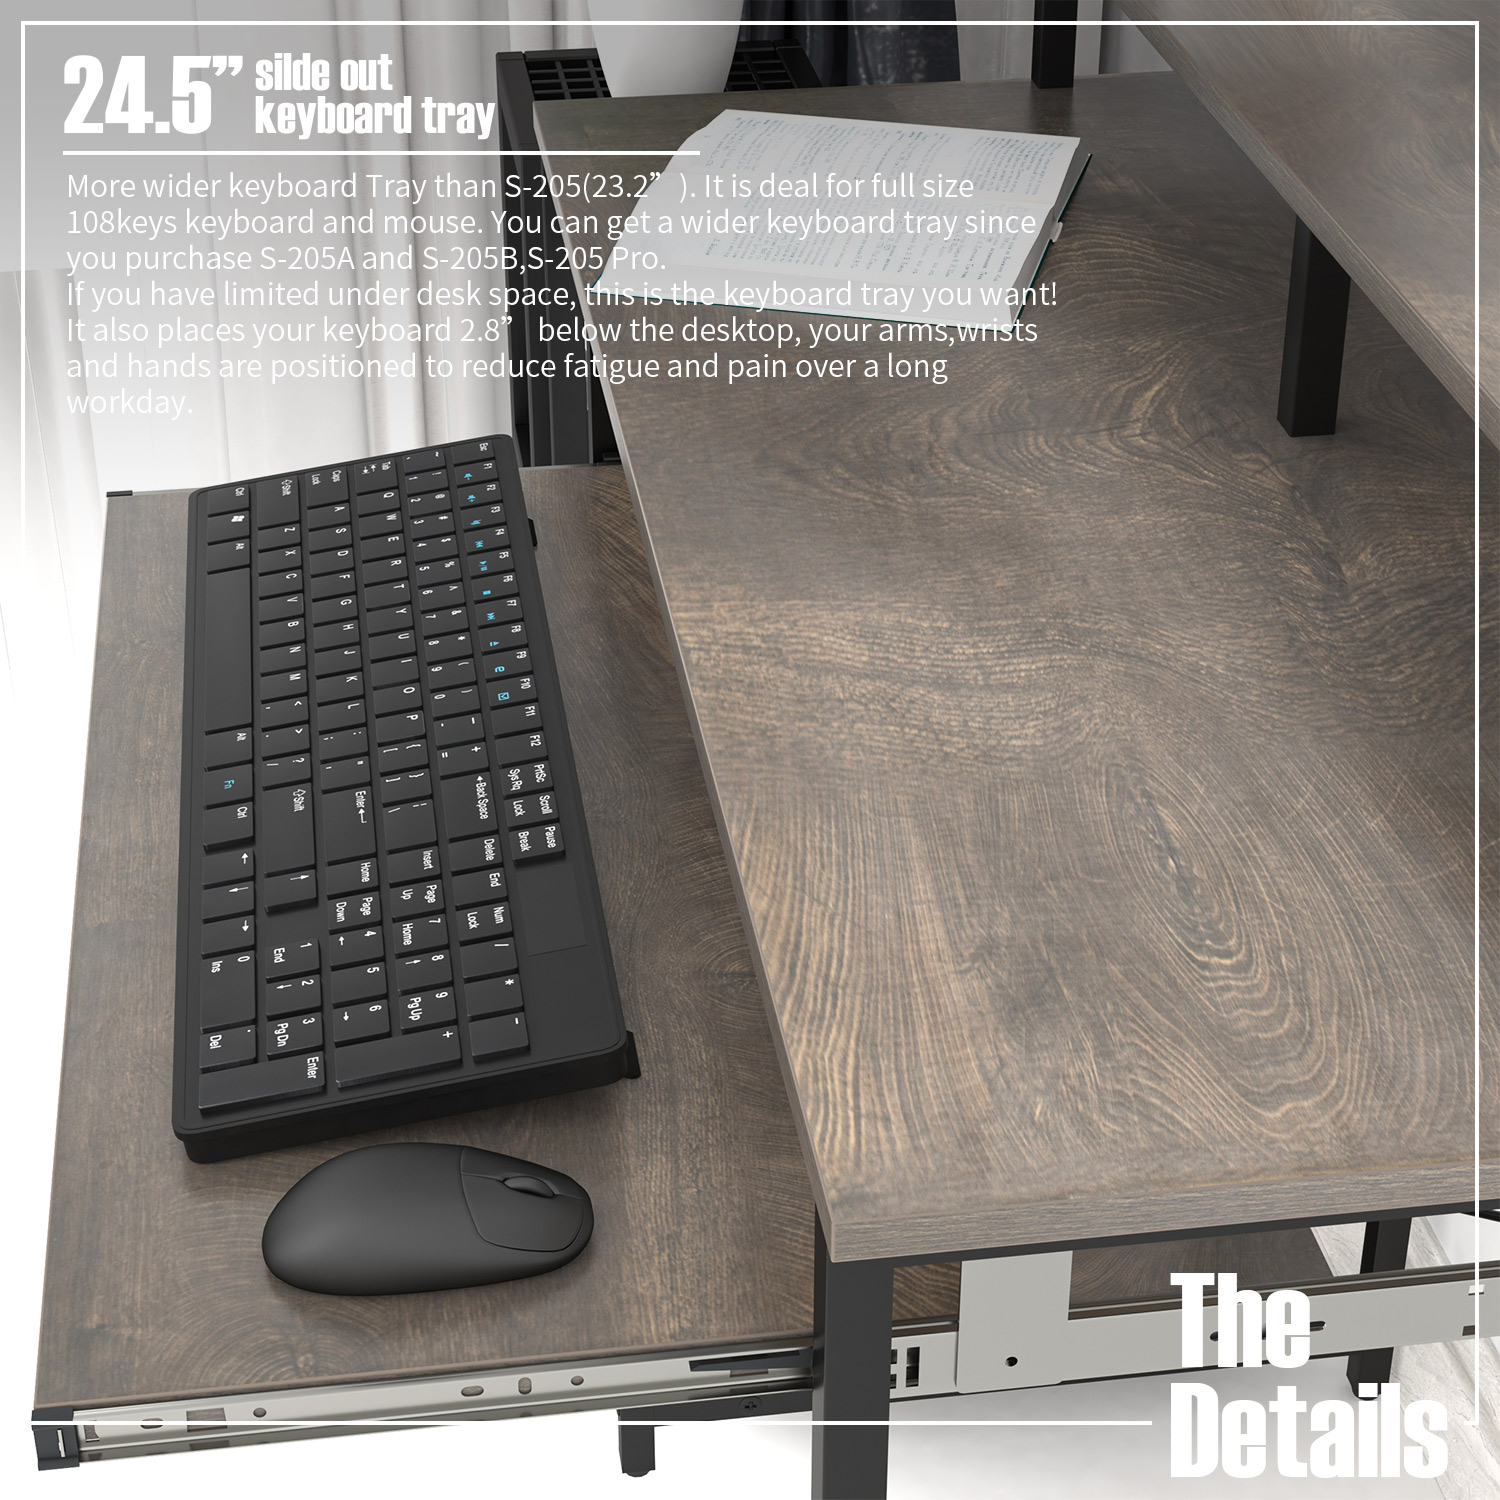 TOPSKY 38.6" Compact Computer Desk with Storage Shelves/24.5” Keyboard Tray/Monitor Stand Study Table for Home Office S-205A